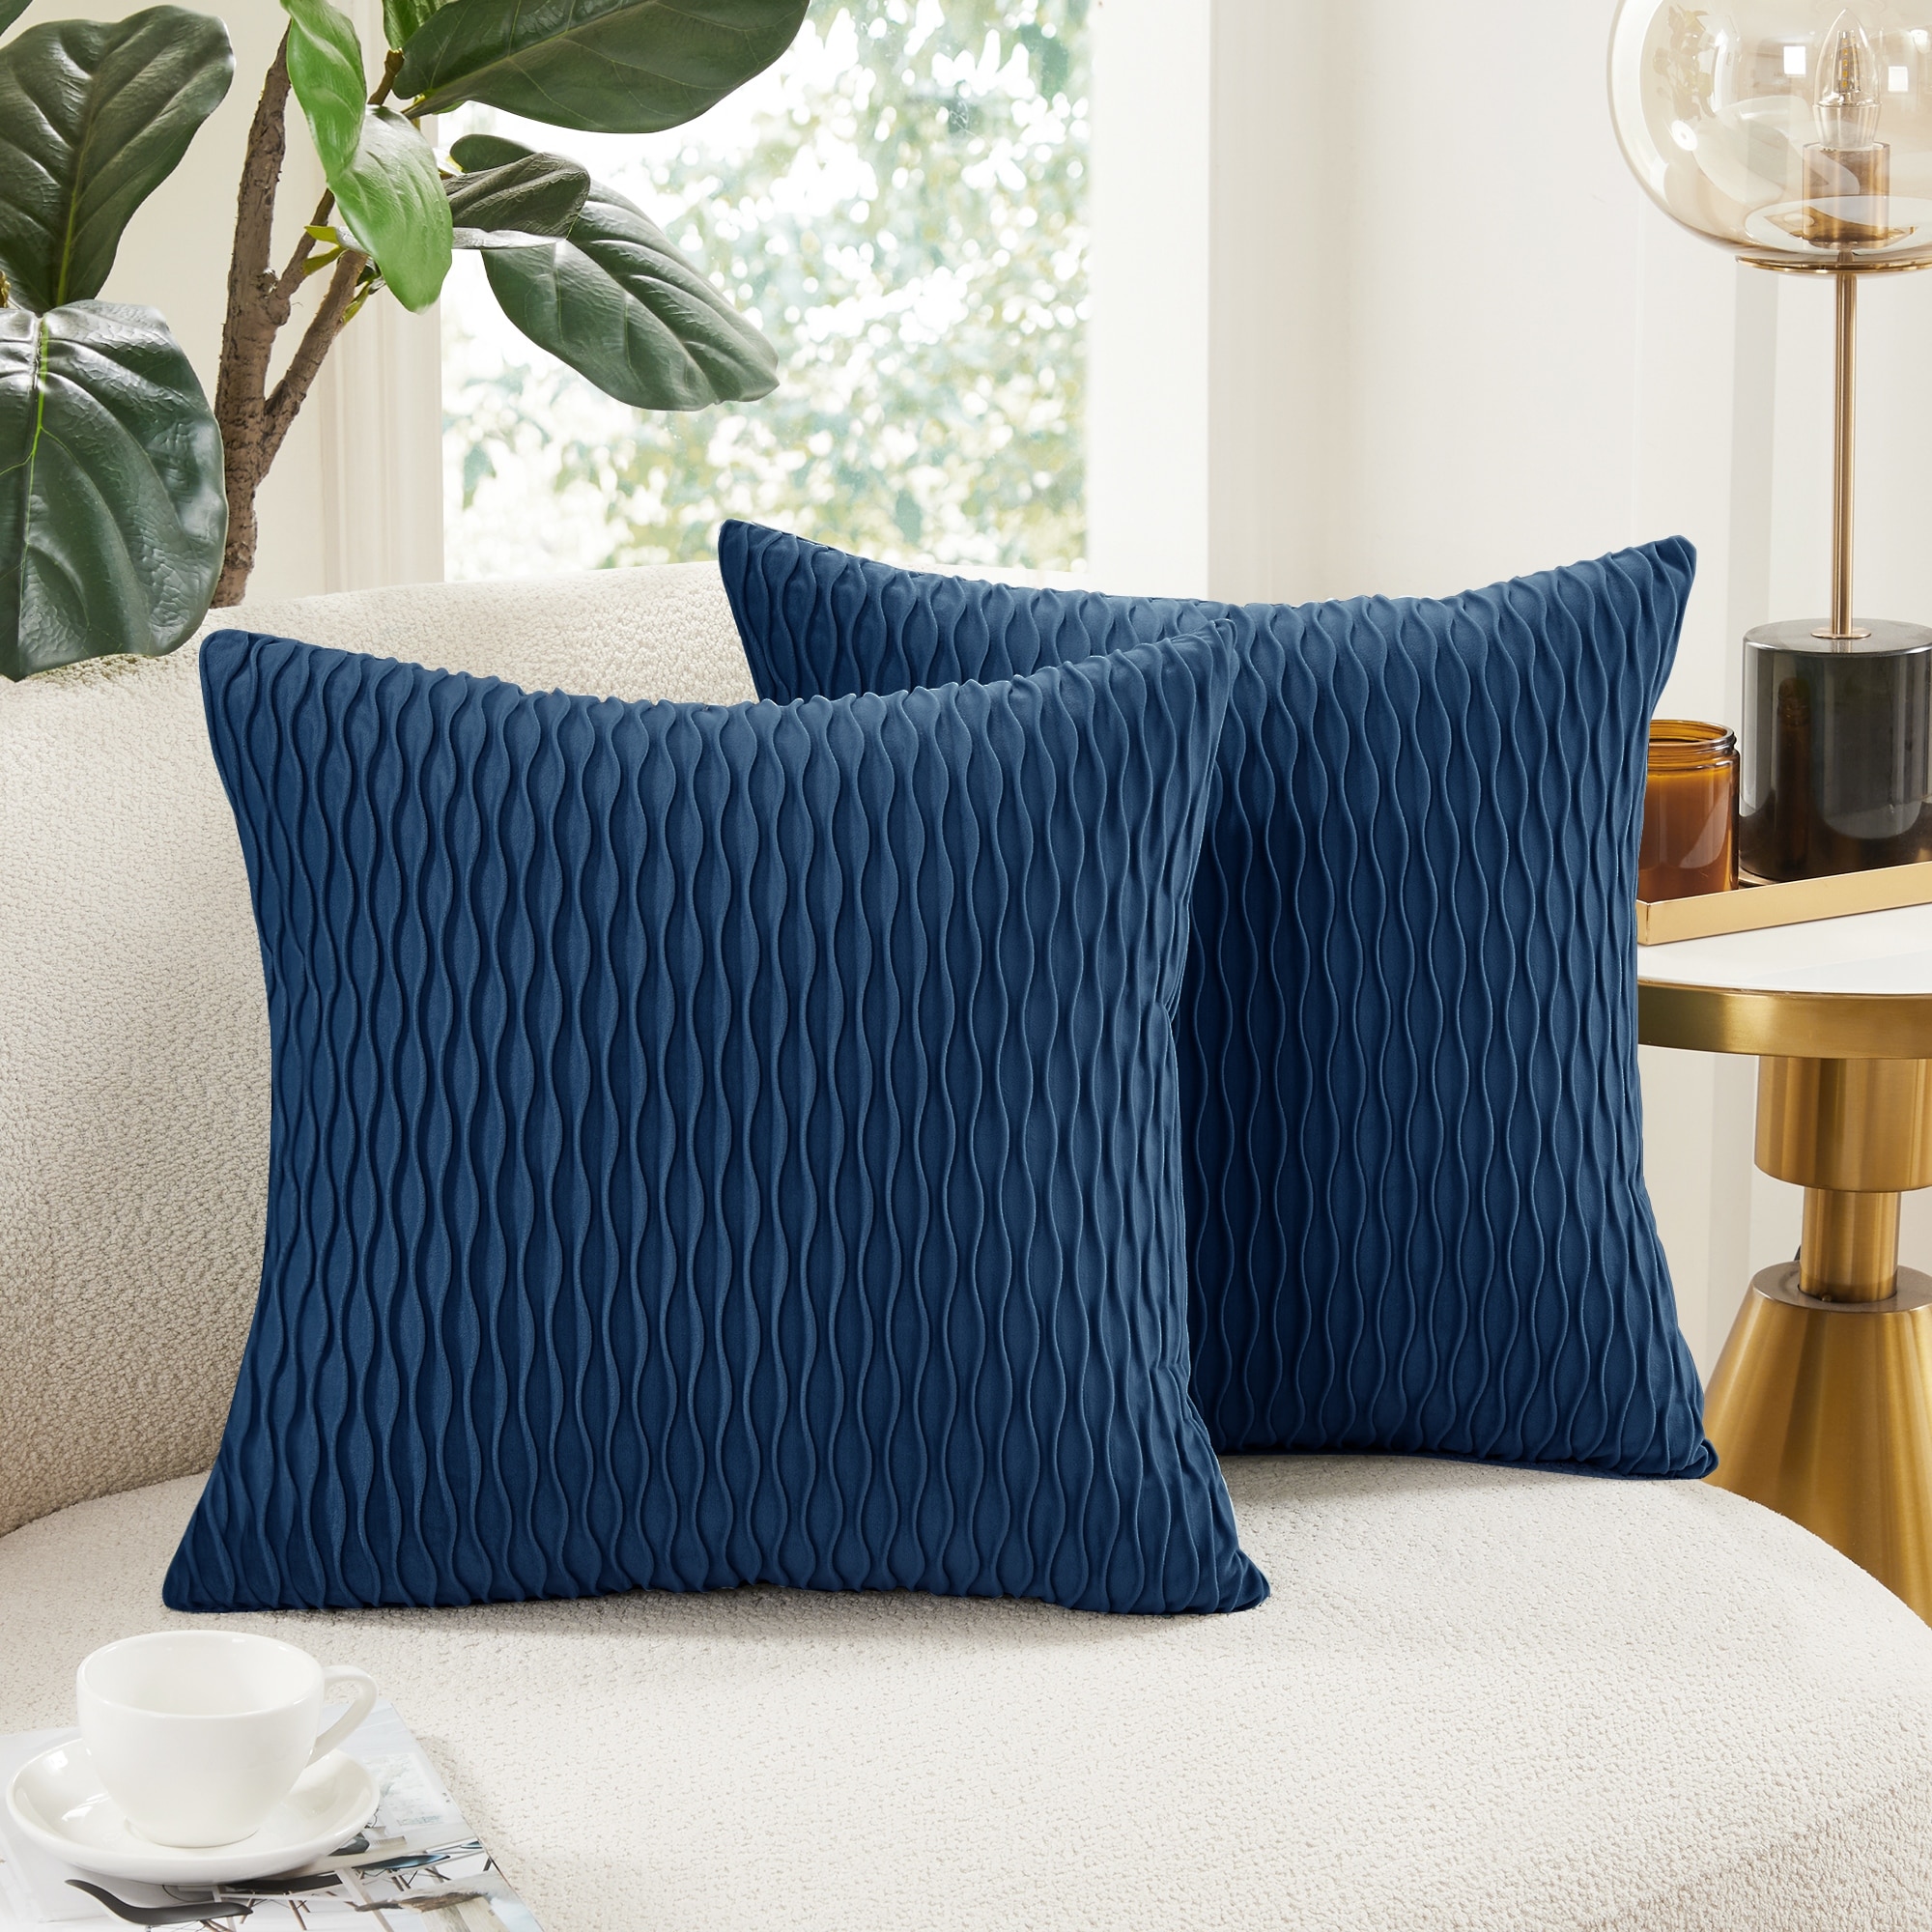 https://ak1.ostkcdn.com/images/products/is/images/direct/a208040830f61a8ce669abfc8a5442075019dcbd/Deconovo-Wave-Design-Velvet-Throw-Pillow-Covers-Pack-of-2.jpg